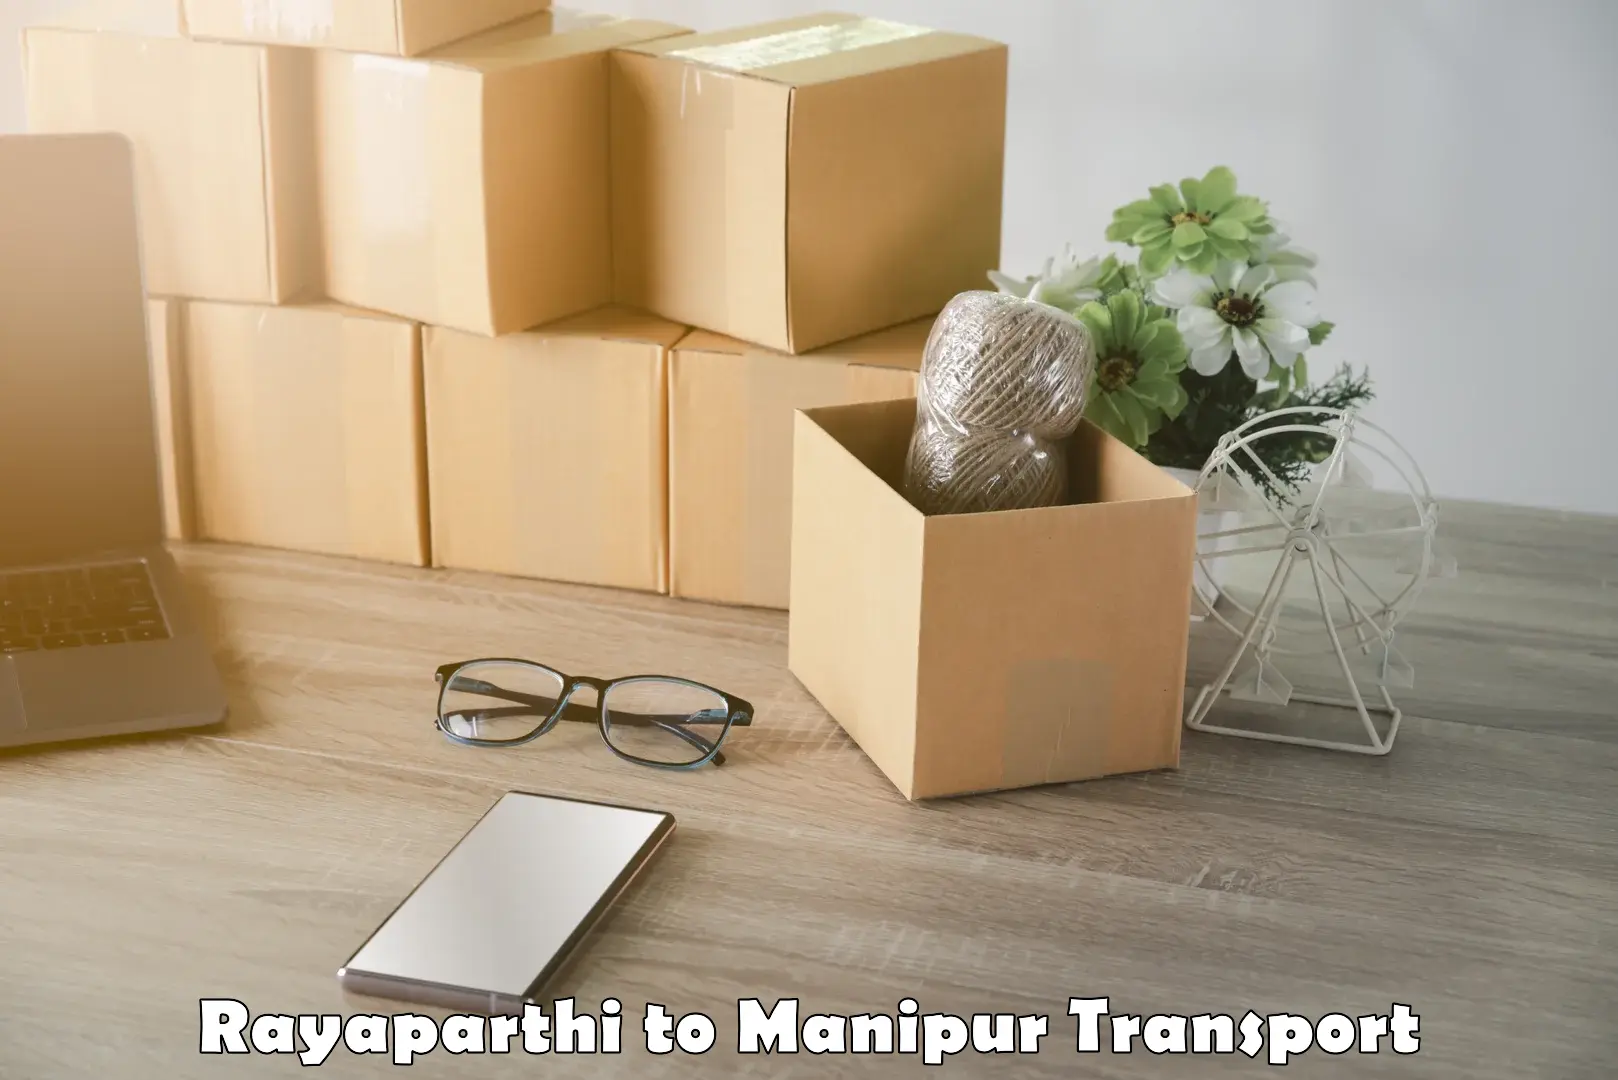 Container transport service Rayaparthi to Manipur